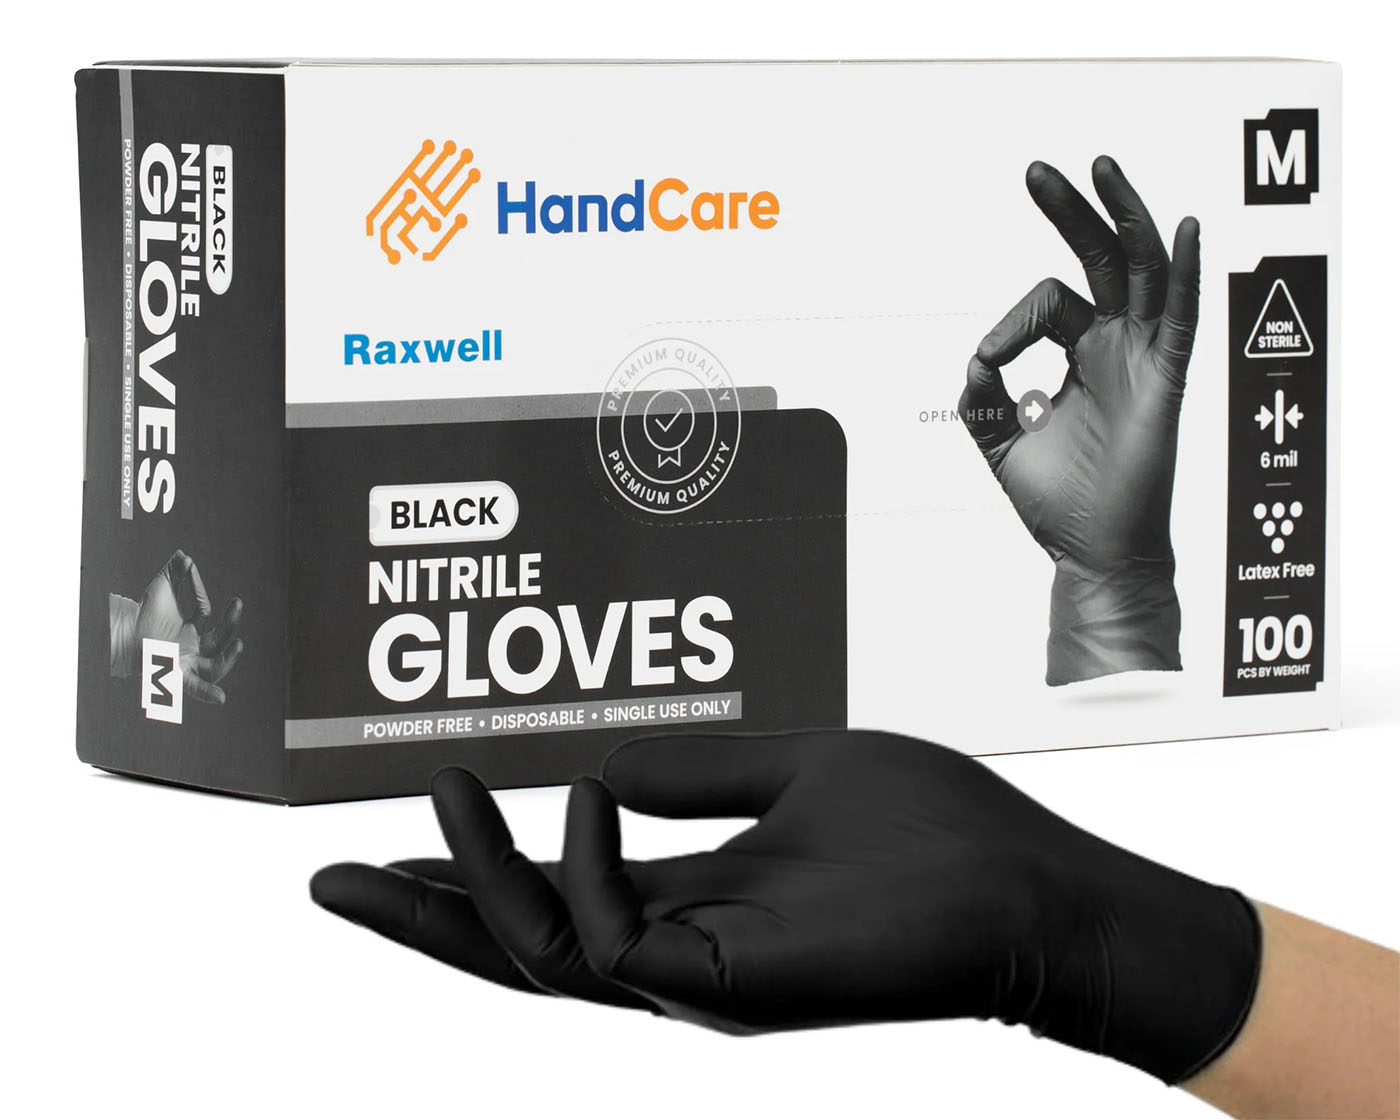 a box of HandCare Black Nitrile Gloves with a hand wearing it